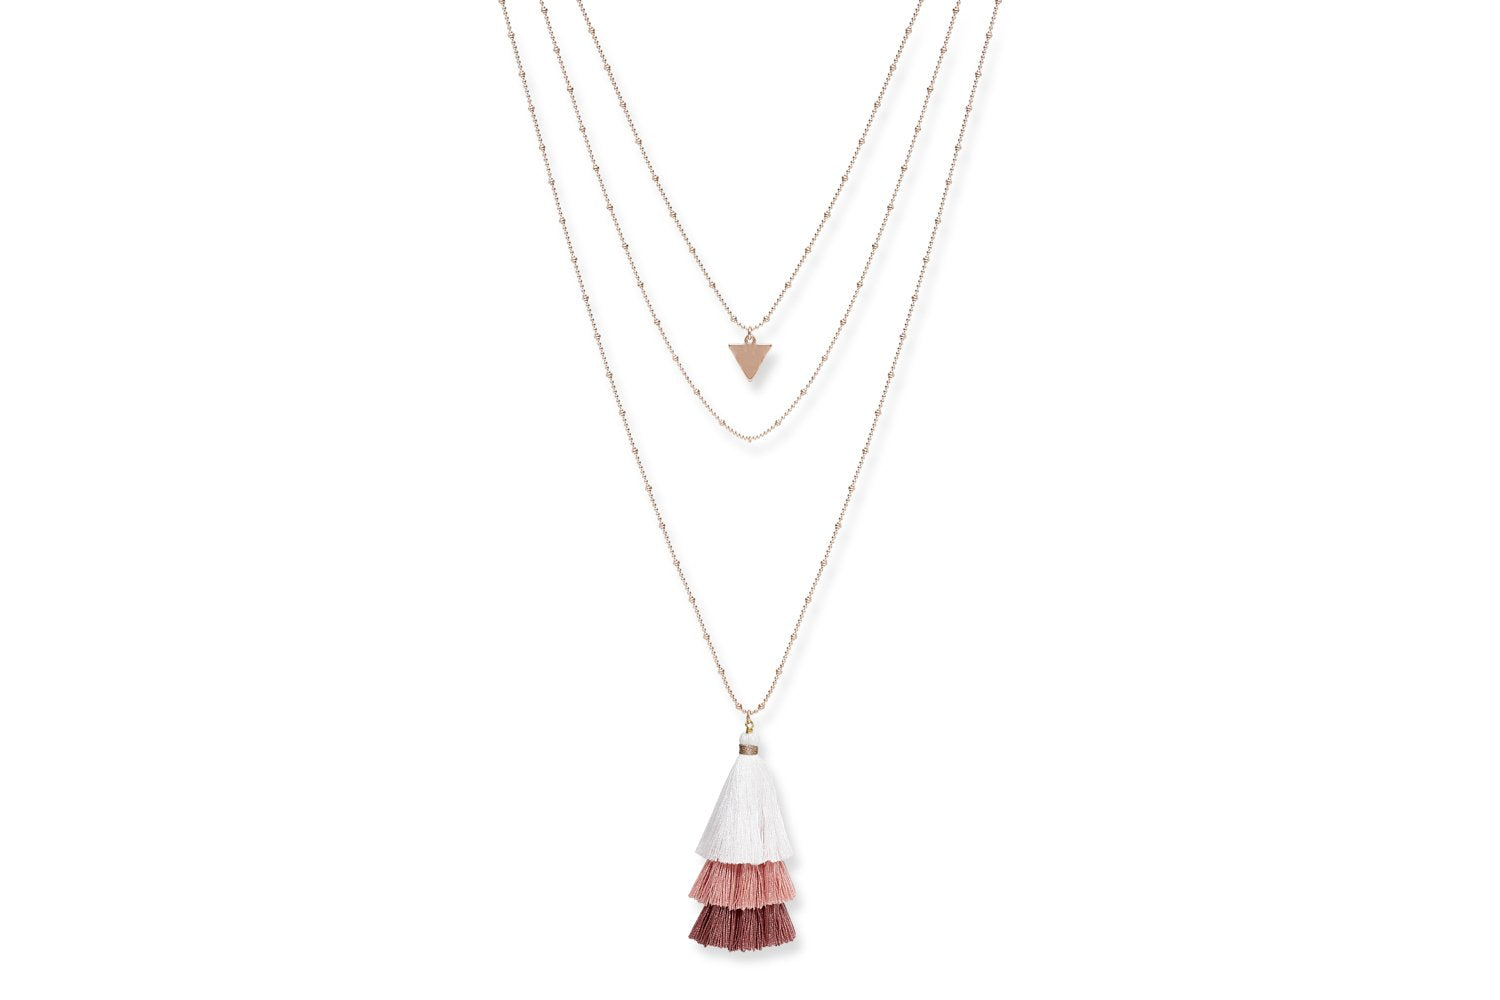 three strand rose gold necklace with pink and white tassels and triangle charm